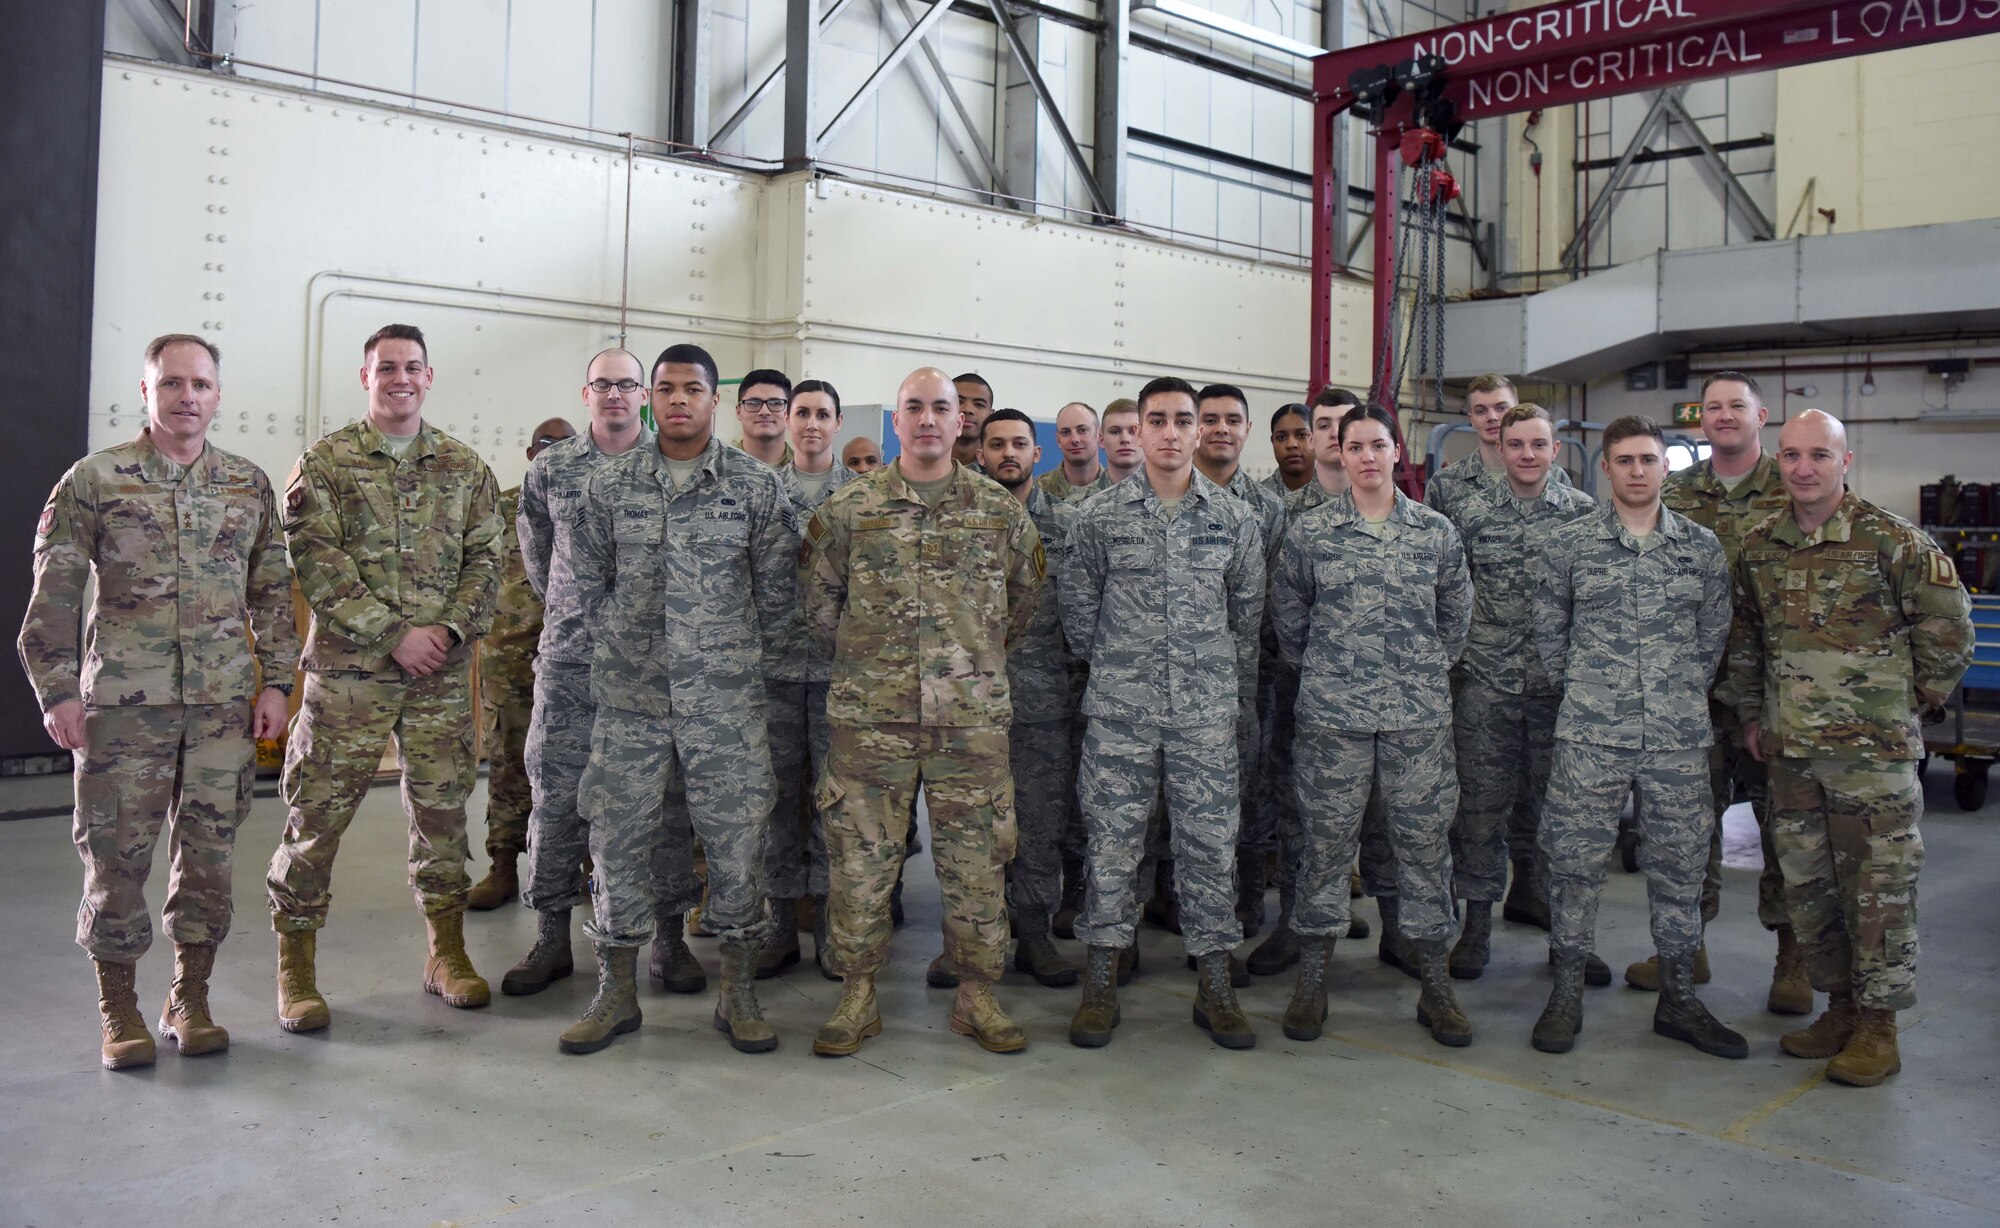 U.S. Air Force Maj. Gen. John Wood, Third Air Force commander, and U.S. Air Force Chief Master Sgt. Anthony Cruz Munoz, Third AF command chief, pose for a photo with Airmen of the 100th Maintenance Squadron aircraft ground equipment shop at RAF Mildenhall, England, April 3, 2019. Third AF leadership also toured the 100th Logistics Readiness Squadron hangar, the 100th Communications Squadron control facility and with Airmen of the 100th Security Forces Squadron. (U.S. Air Force photo by Airman 1st Class Brandon Esau)